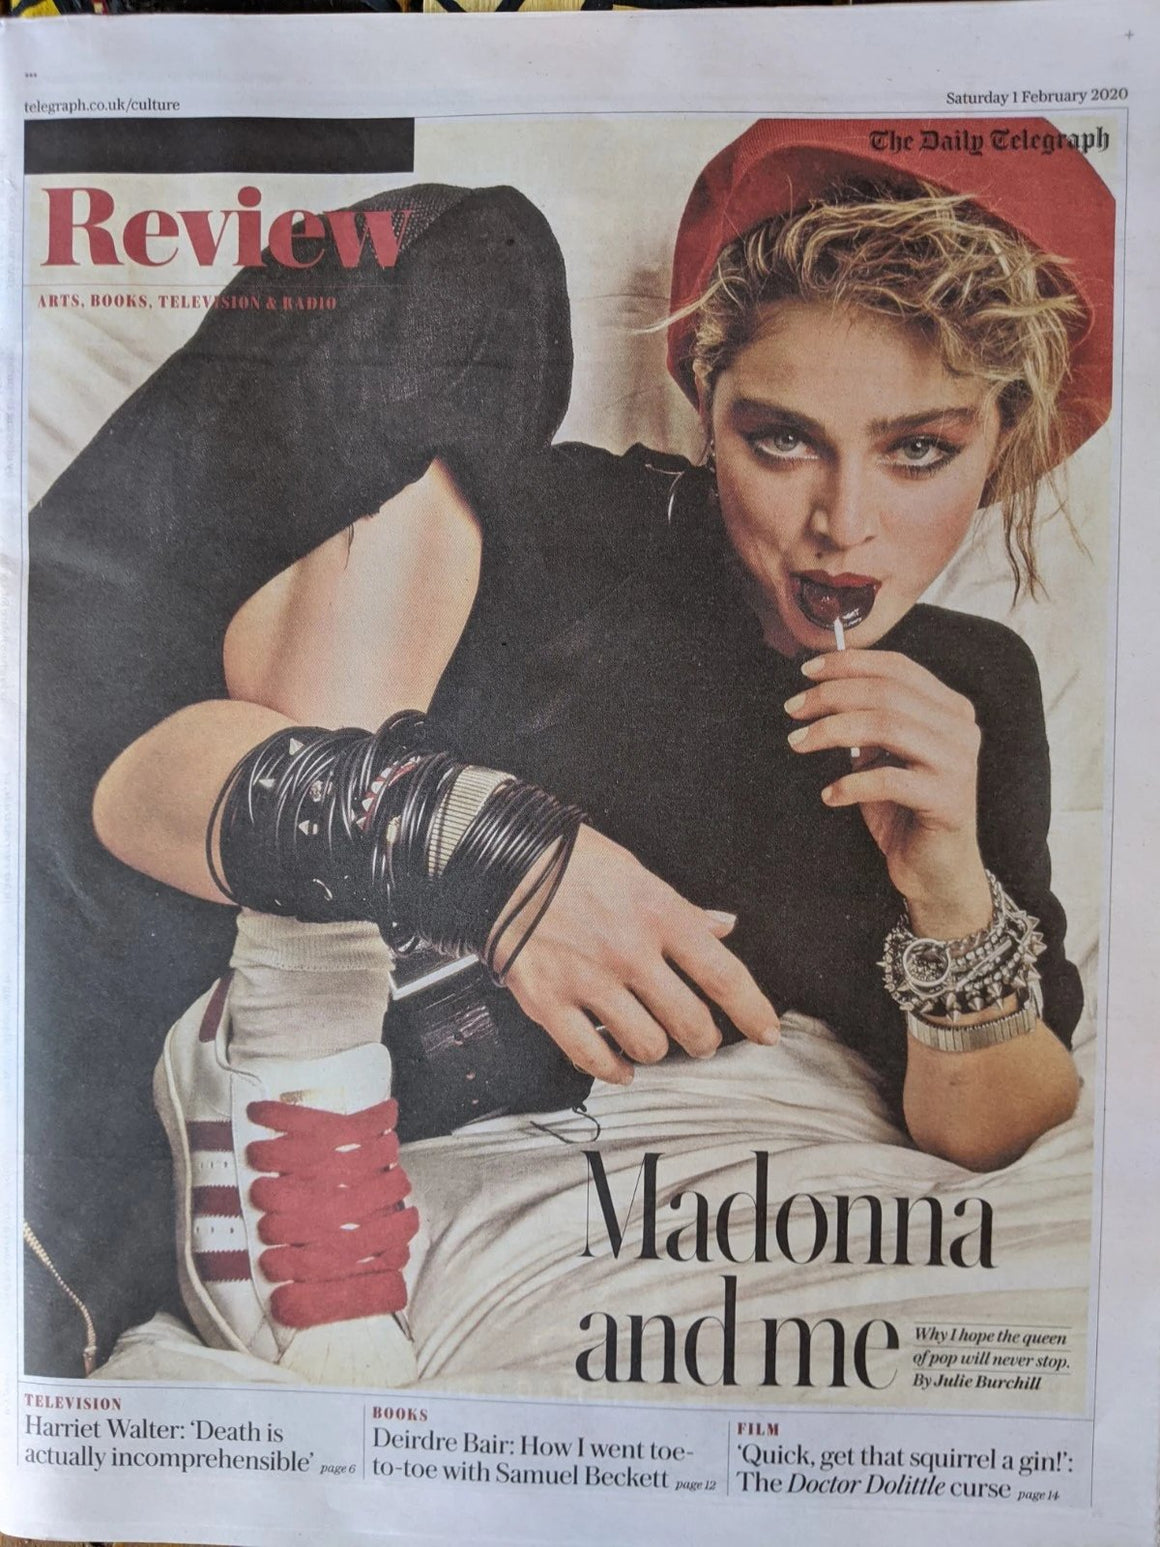 UK Telegraph Review February 2020: MADONNA COVER FEATURE